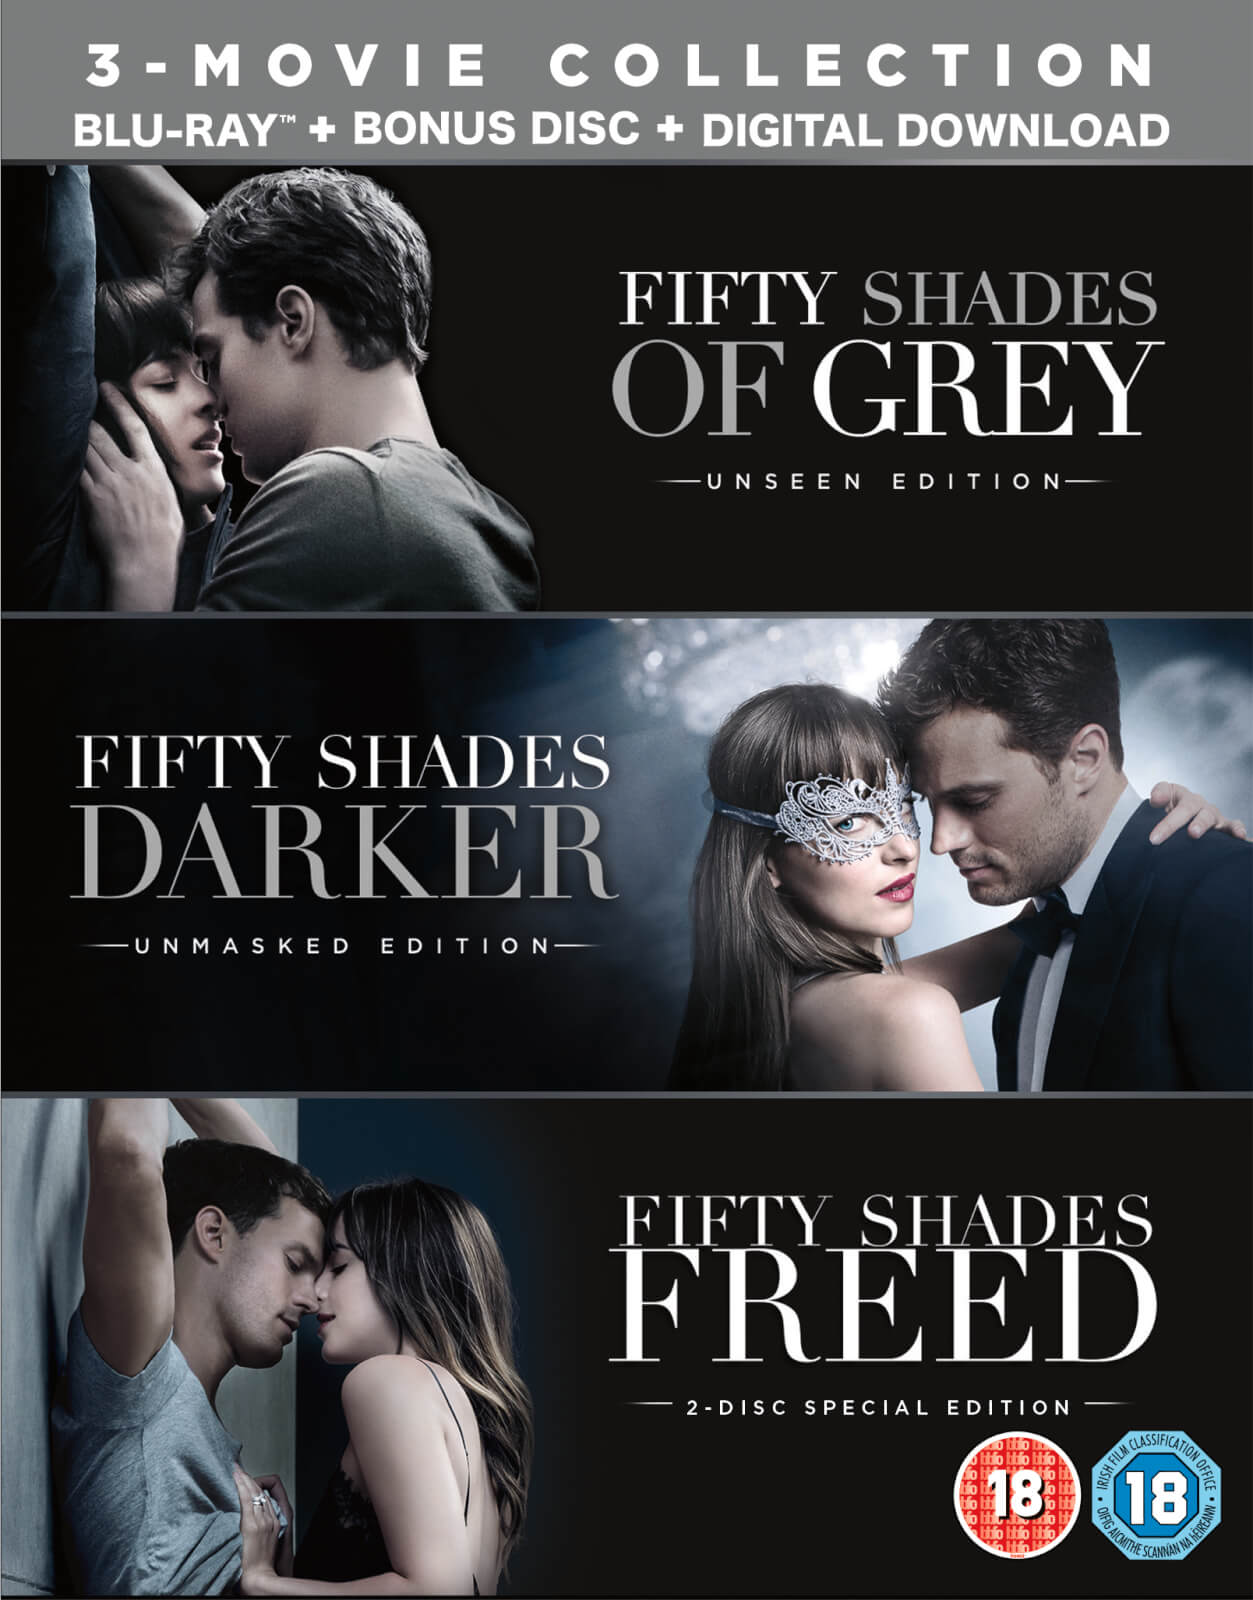 Fifty Shades: 3-Movie Collection [Blu-ray]